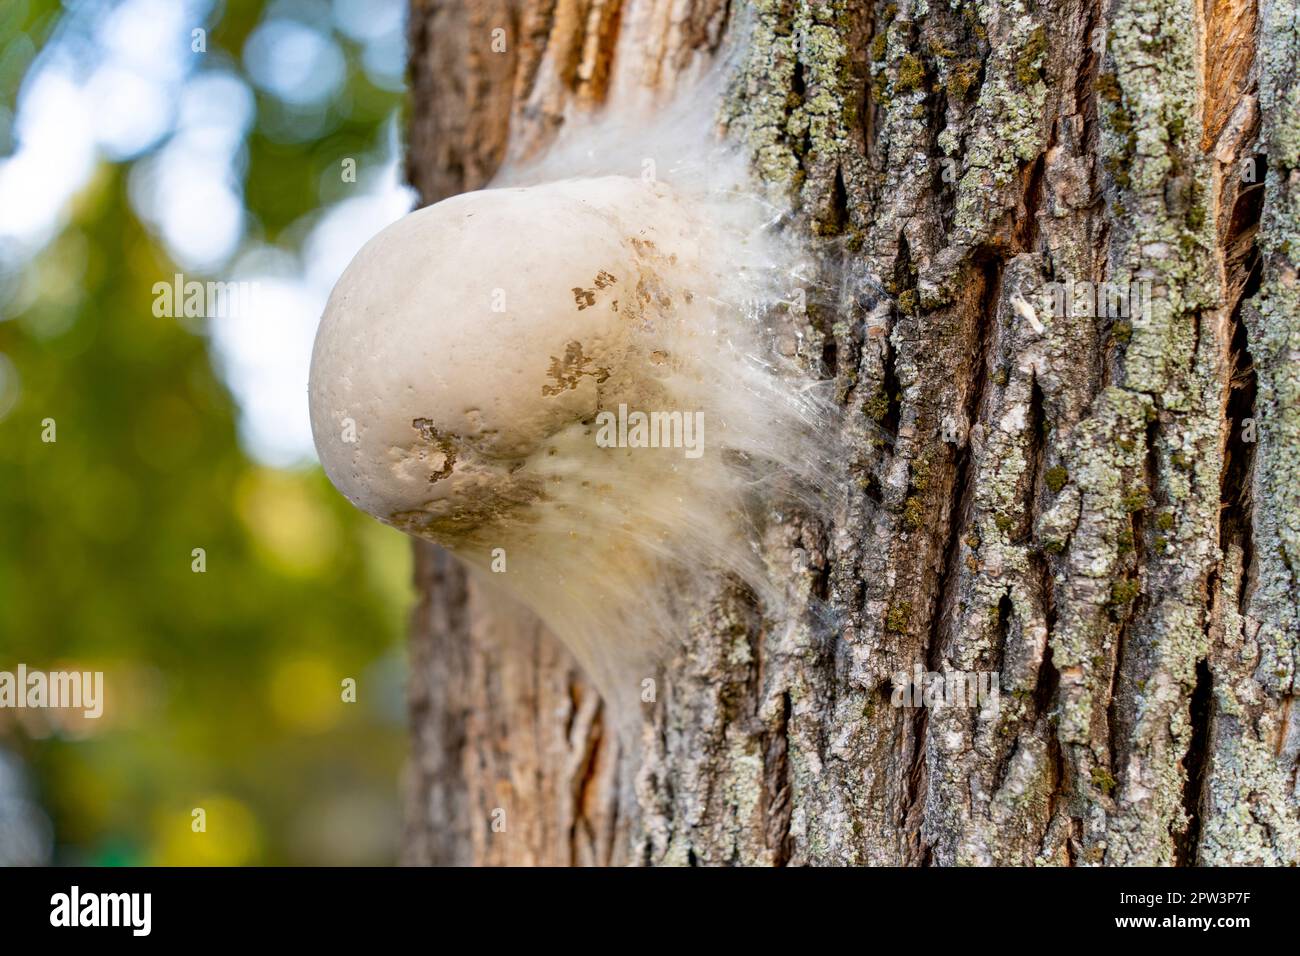 A fungus growing on the bark of a tree Stock Photo